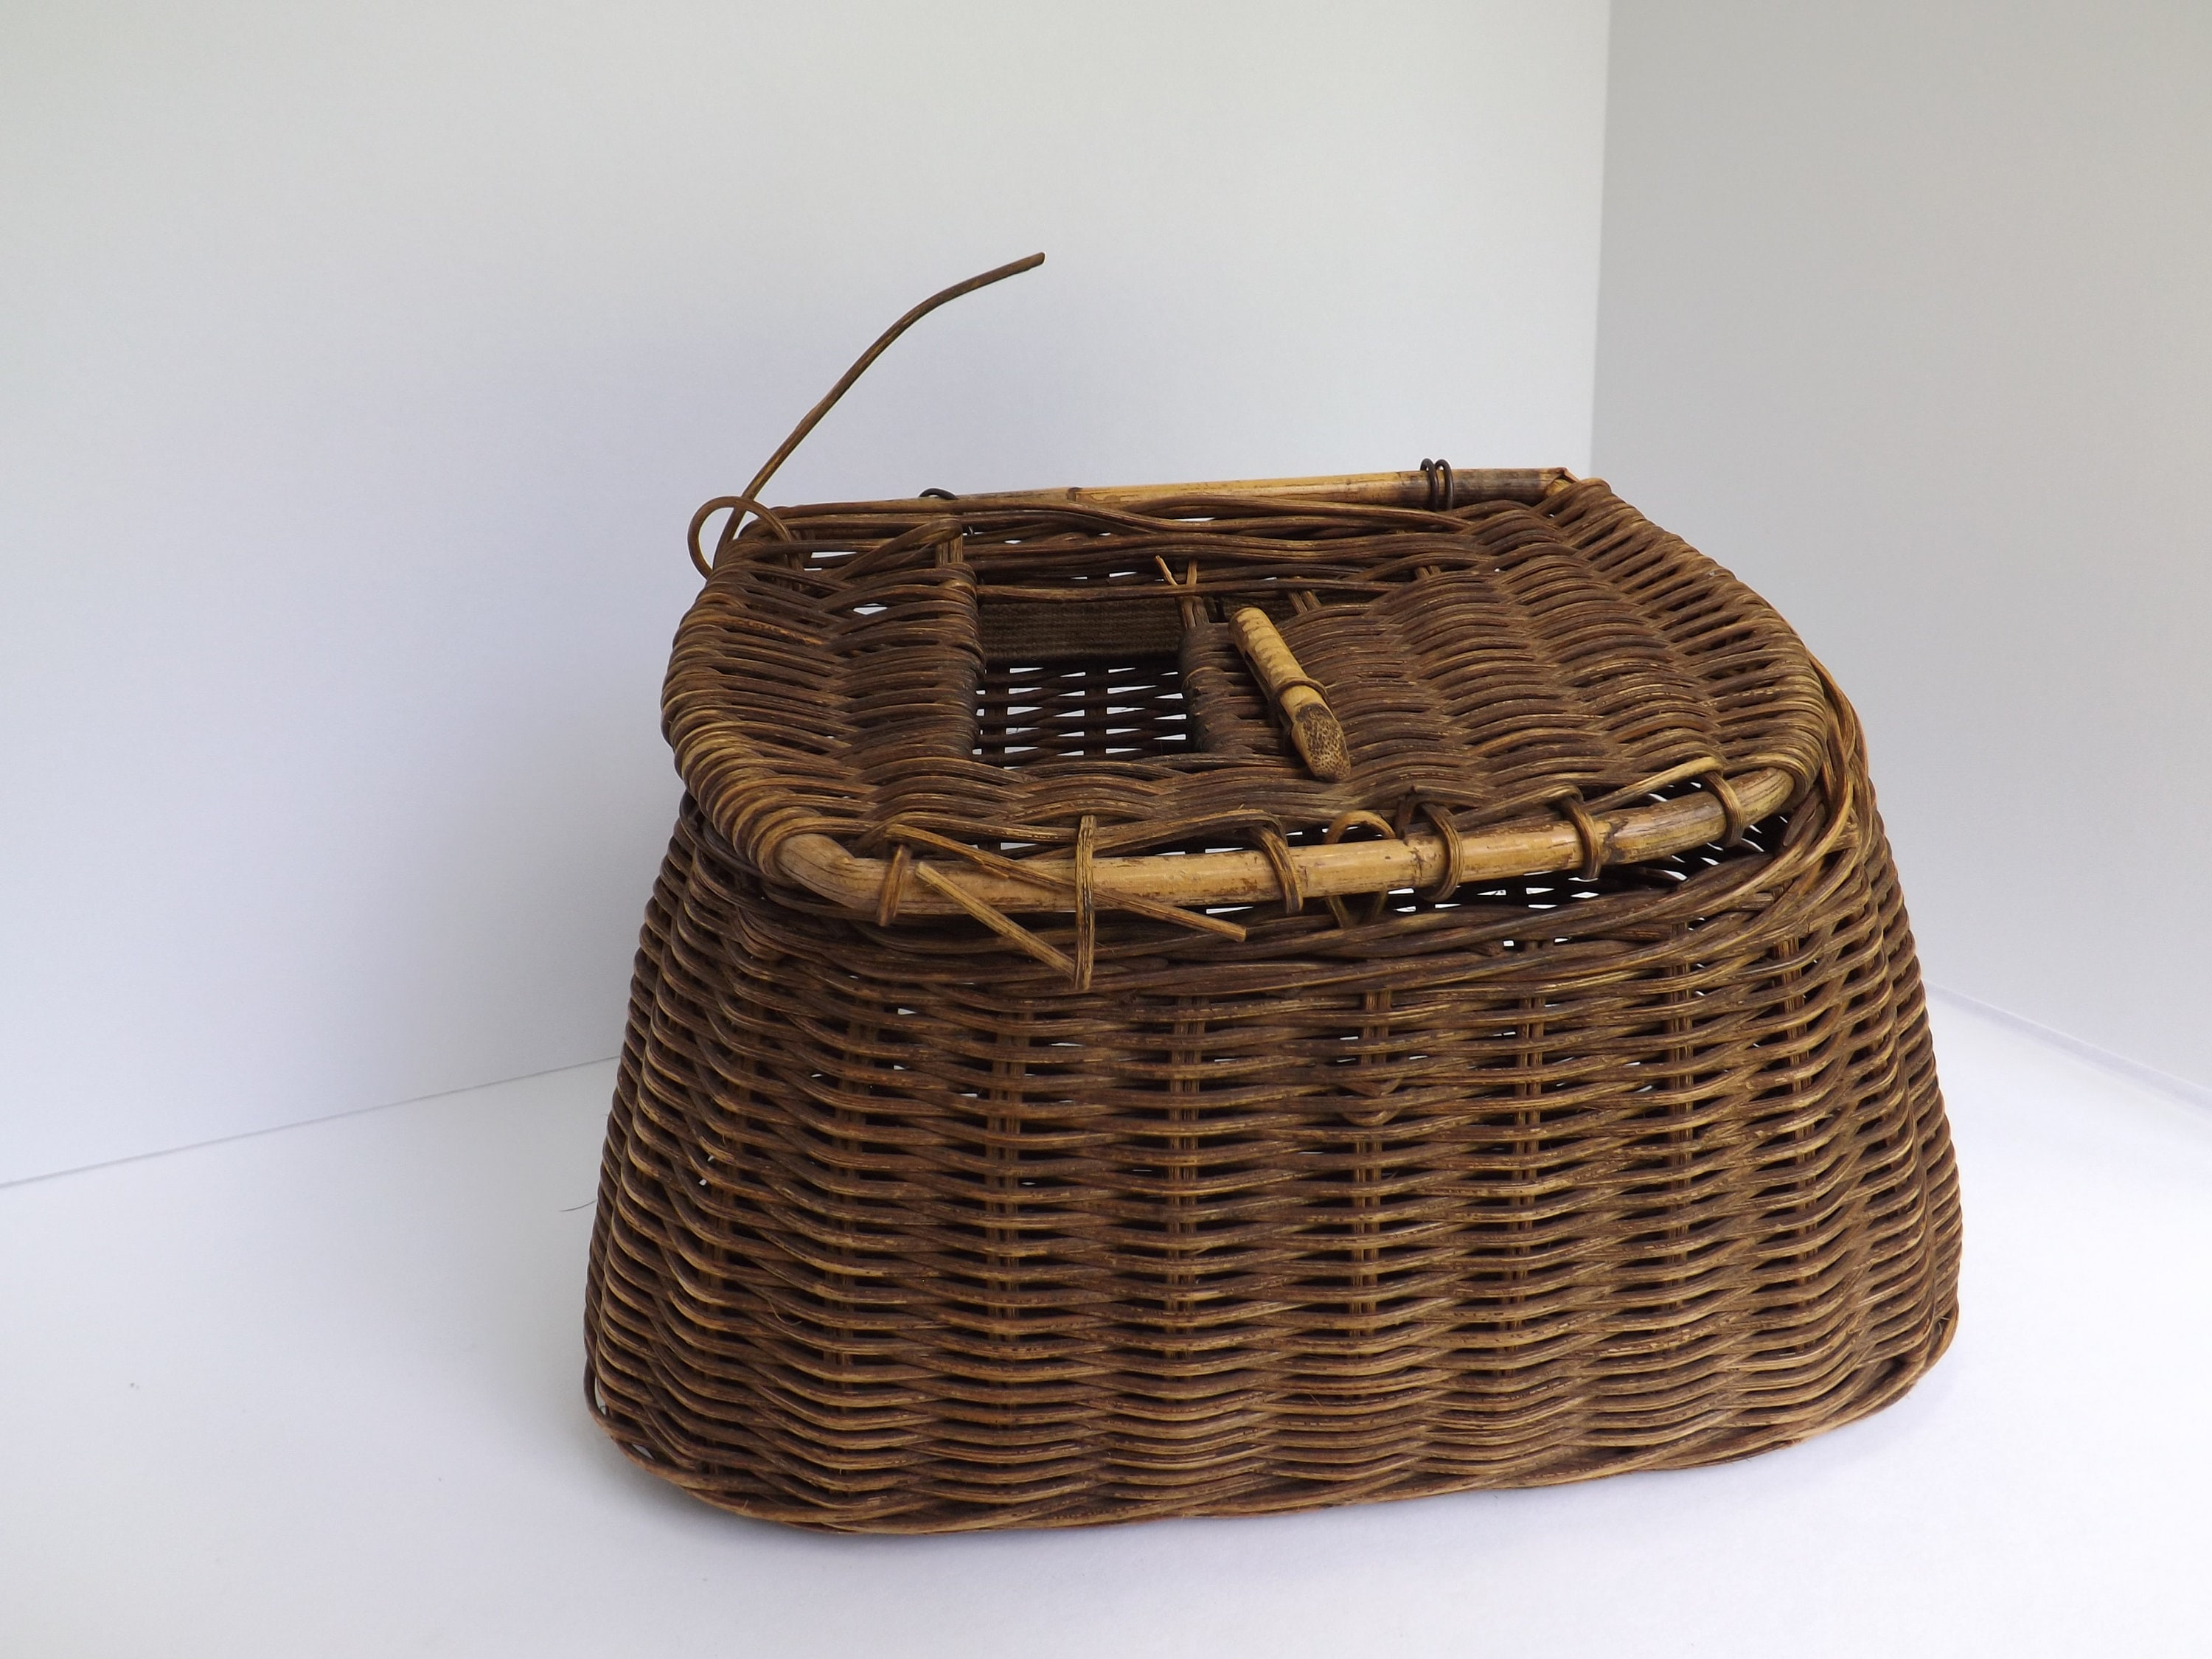 Wicker fishing creel, vintage, basket, no strap, rustic, cabin, camp, lake,  fish, old, wood, container, decor decoration, lodge, display